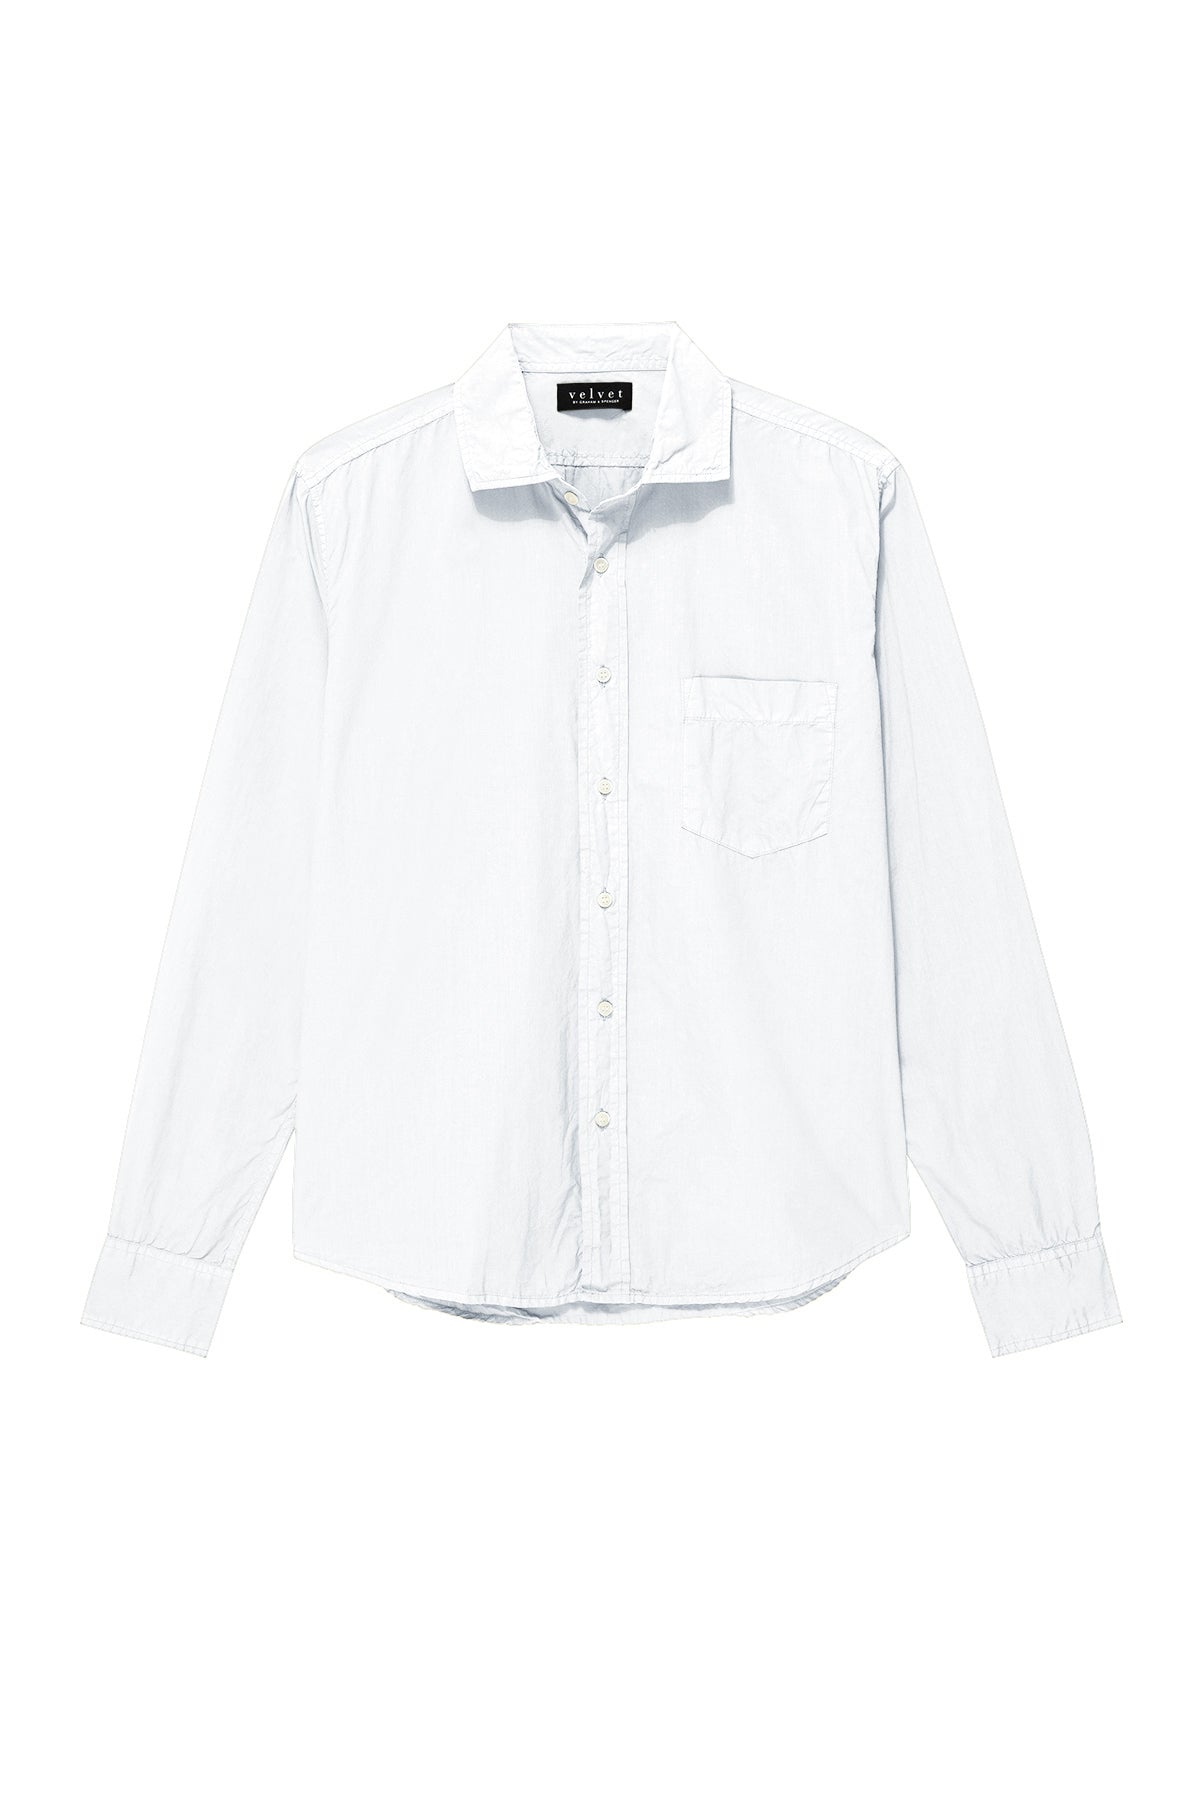   Brooks Button-Up Shirt in white flat 